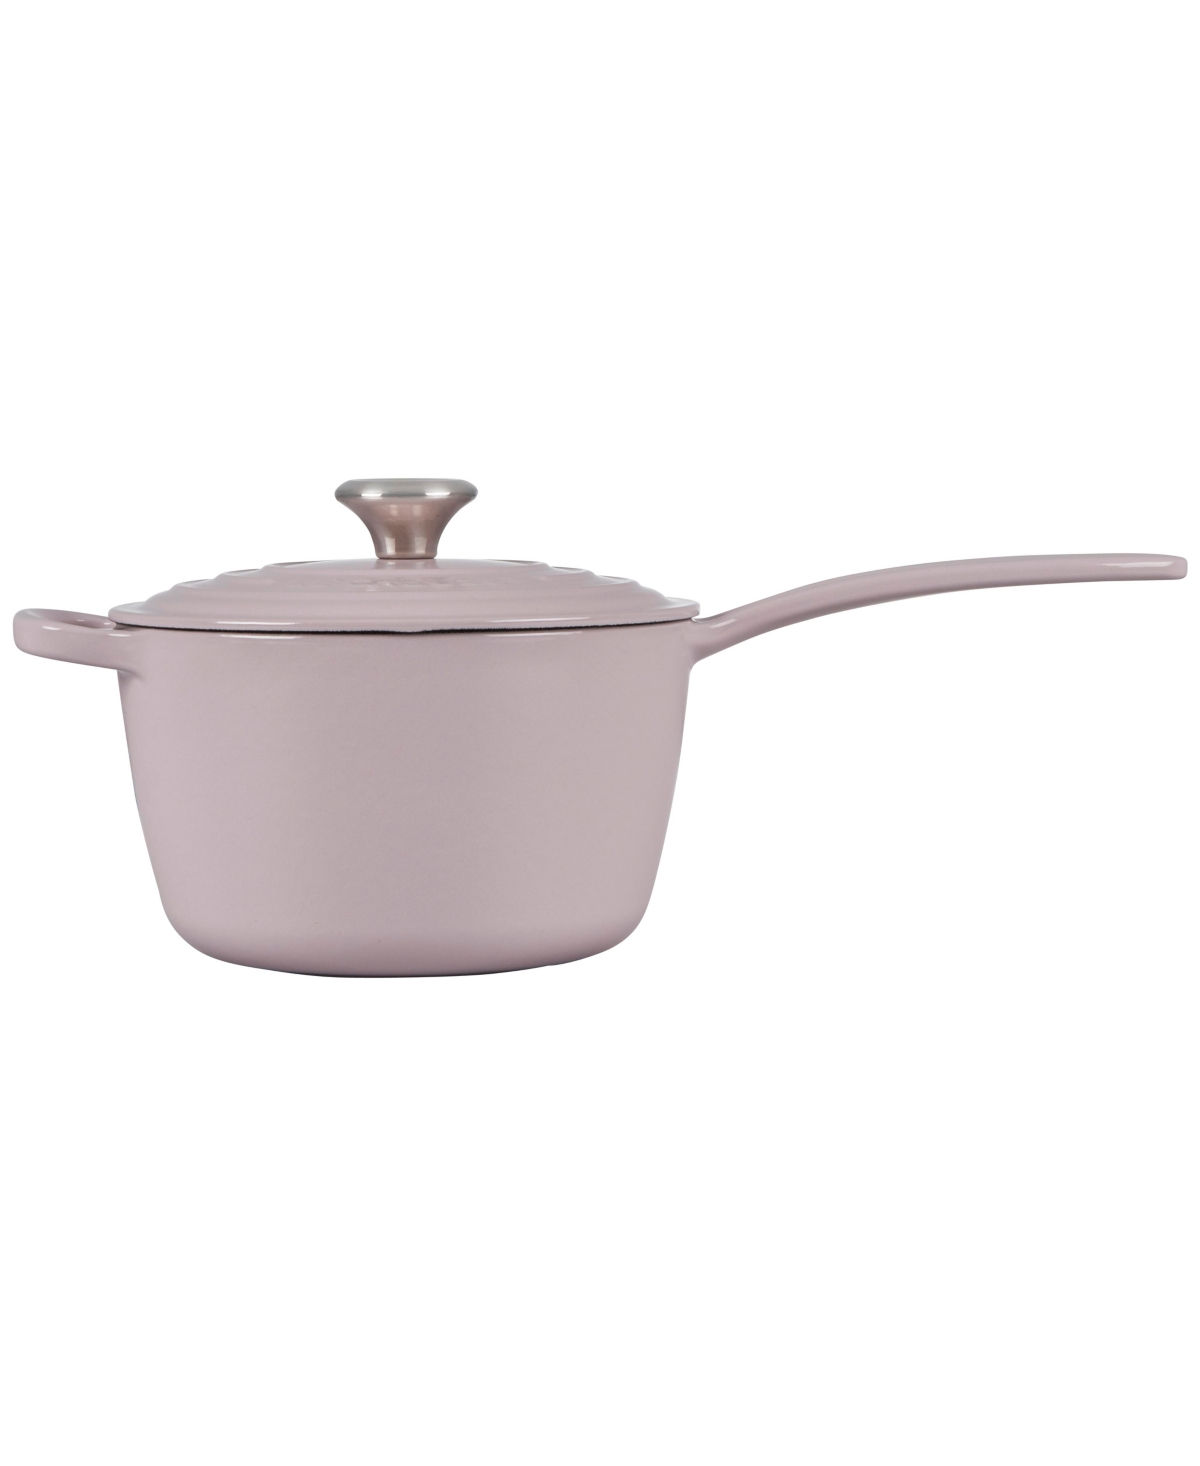 Le Creuset 2.25 Quart Enameled Cast Iron Saucepan With Lid In Shallot